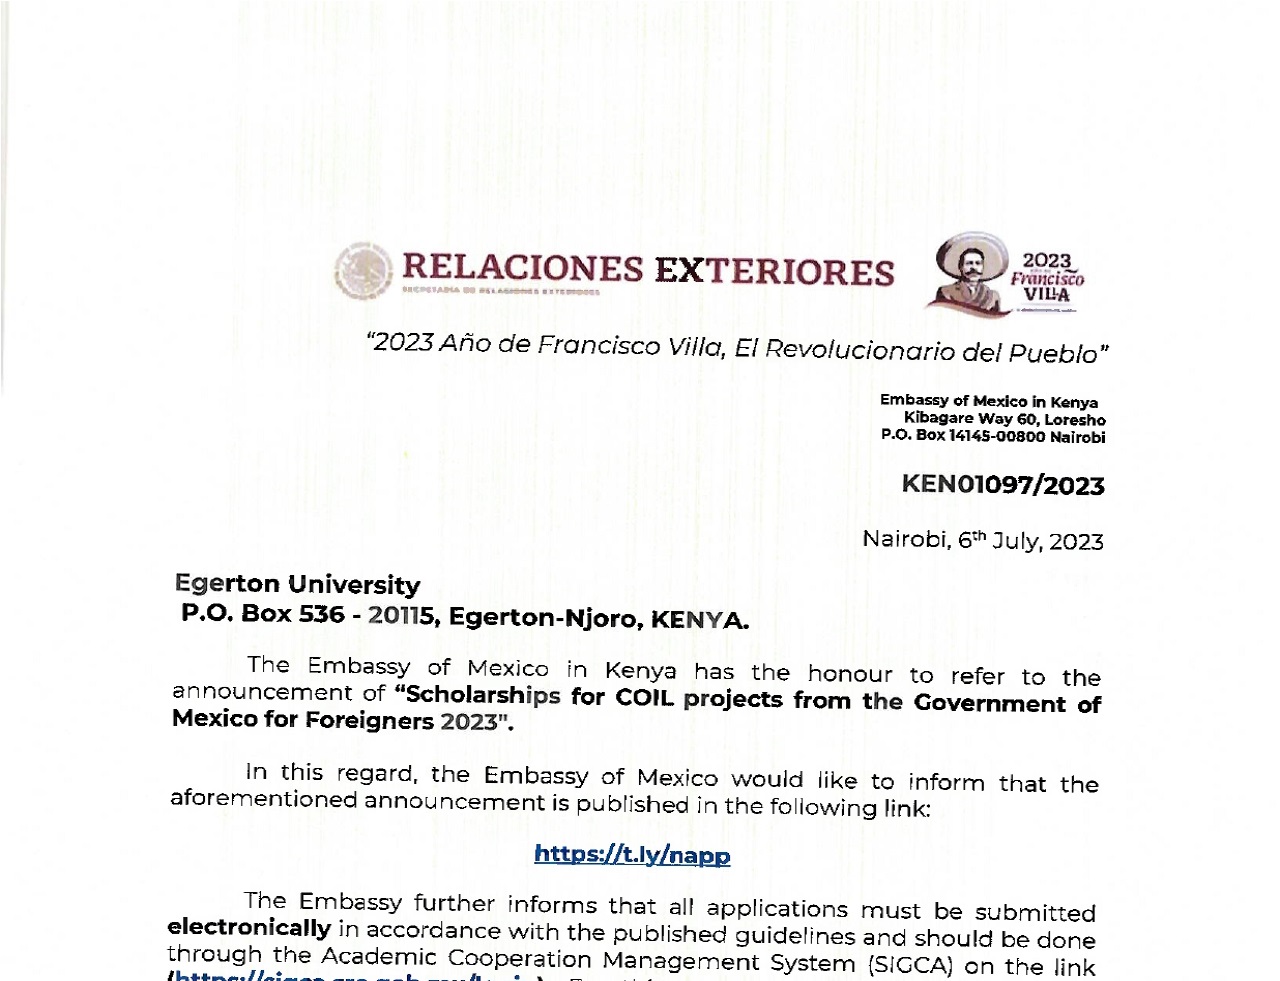 Announcement of Scholarships for COIL projects from the Government of Mexico for Foreigners 2023